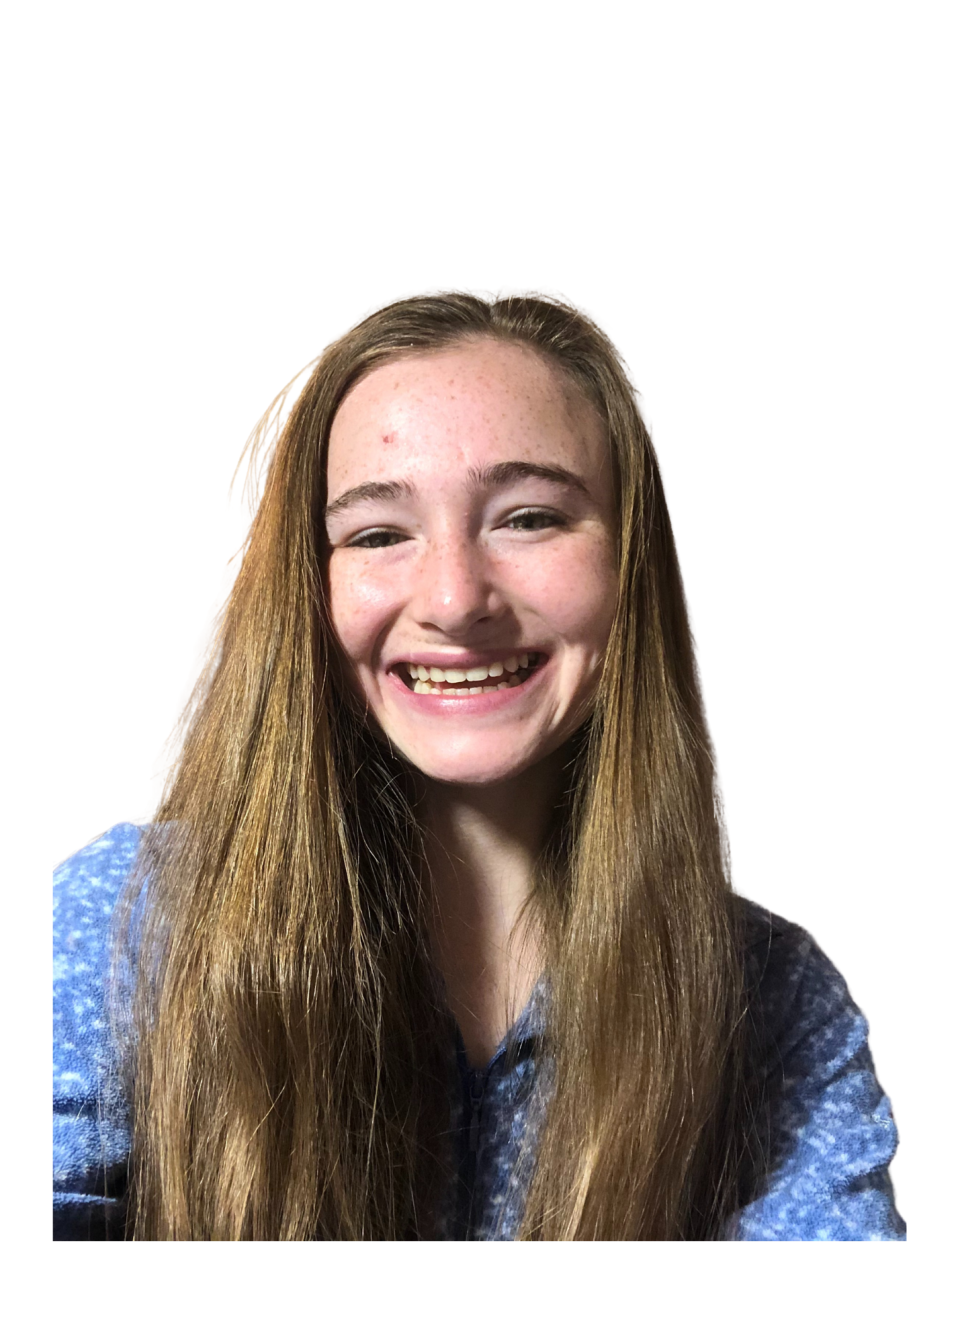 Danica Purtell of Beaver Area High School will participate in the Distinguished Young Women of Beaver County program